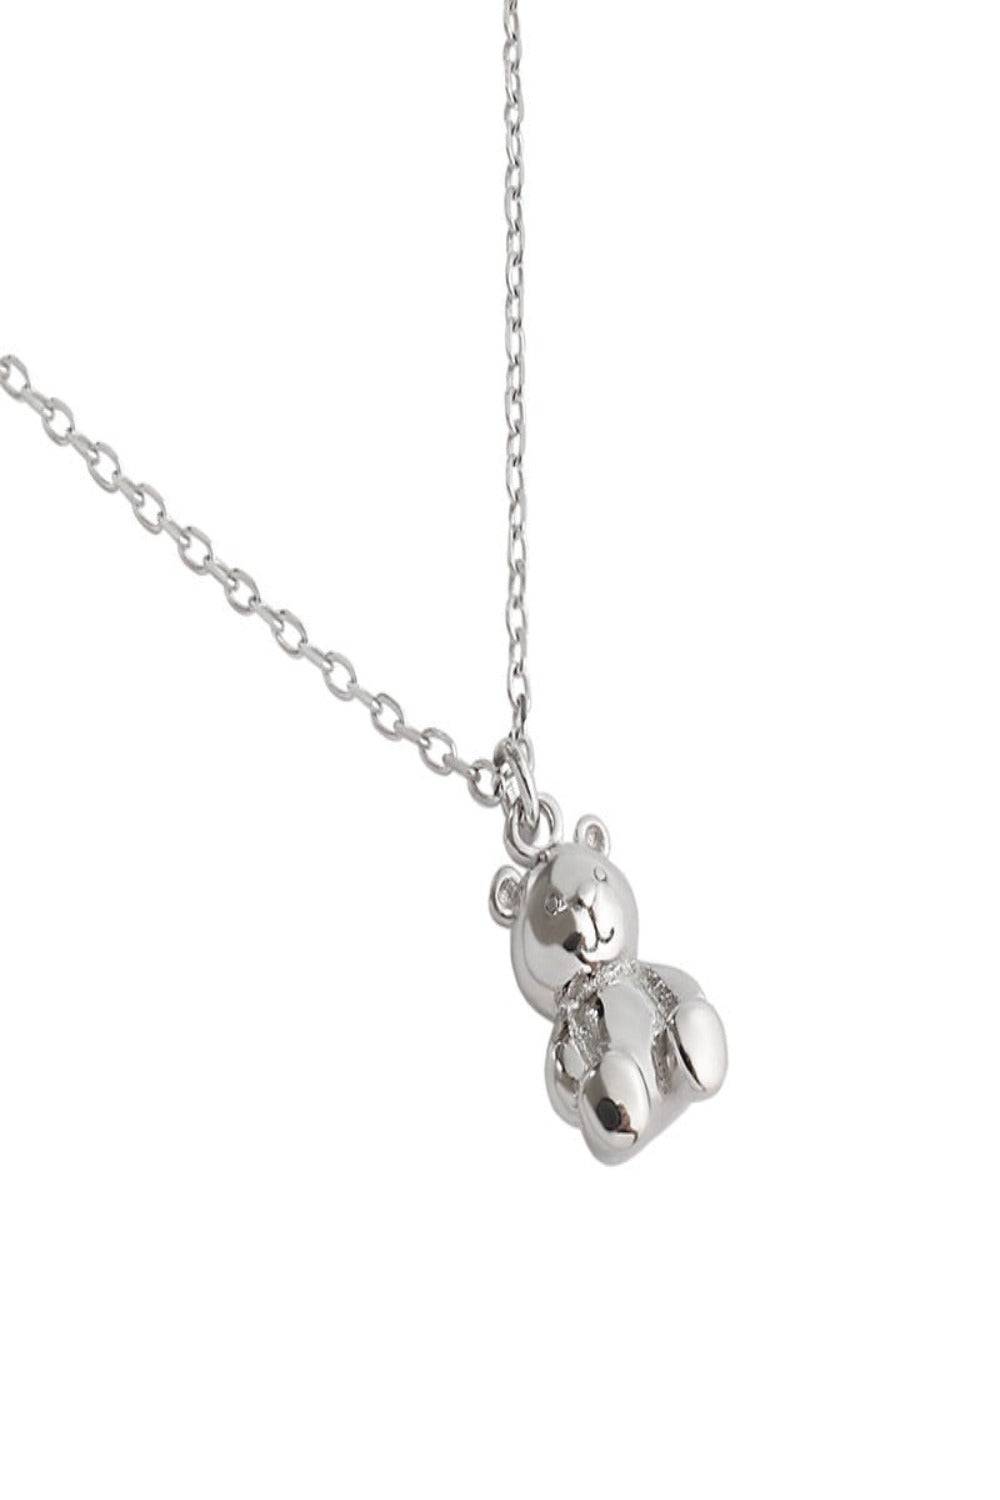 925 Sterling Silver Teddy Bear Charm Necklace - TGC Boutique - Silver Necklace